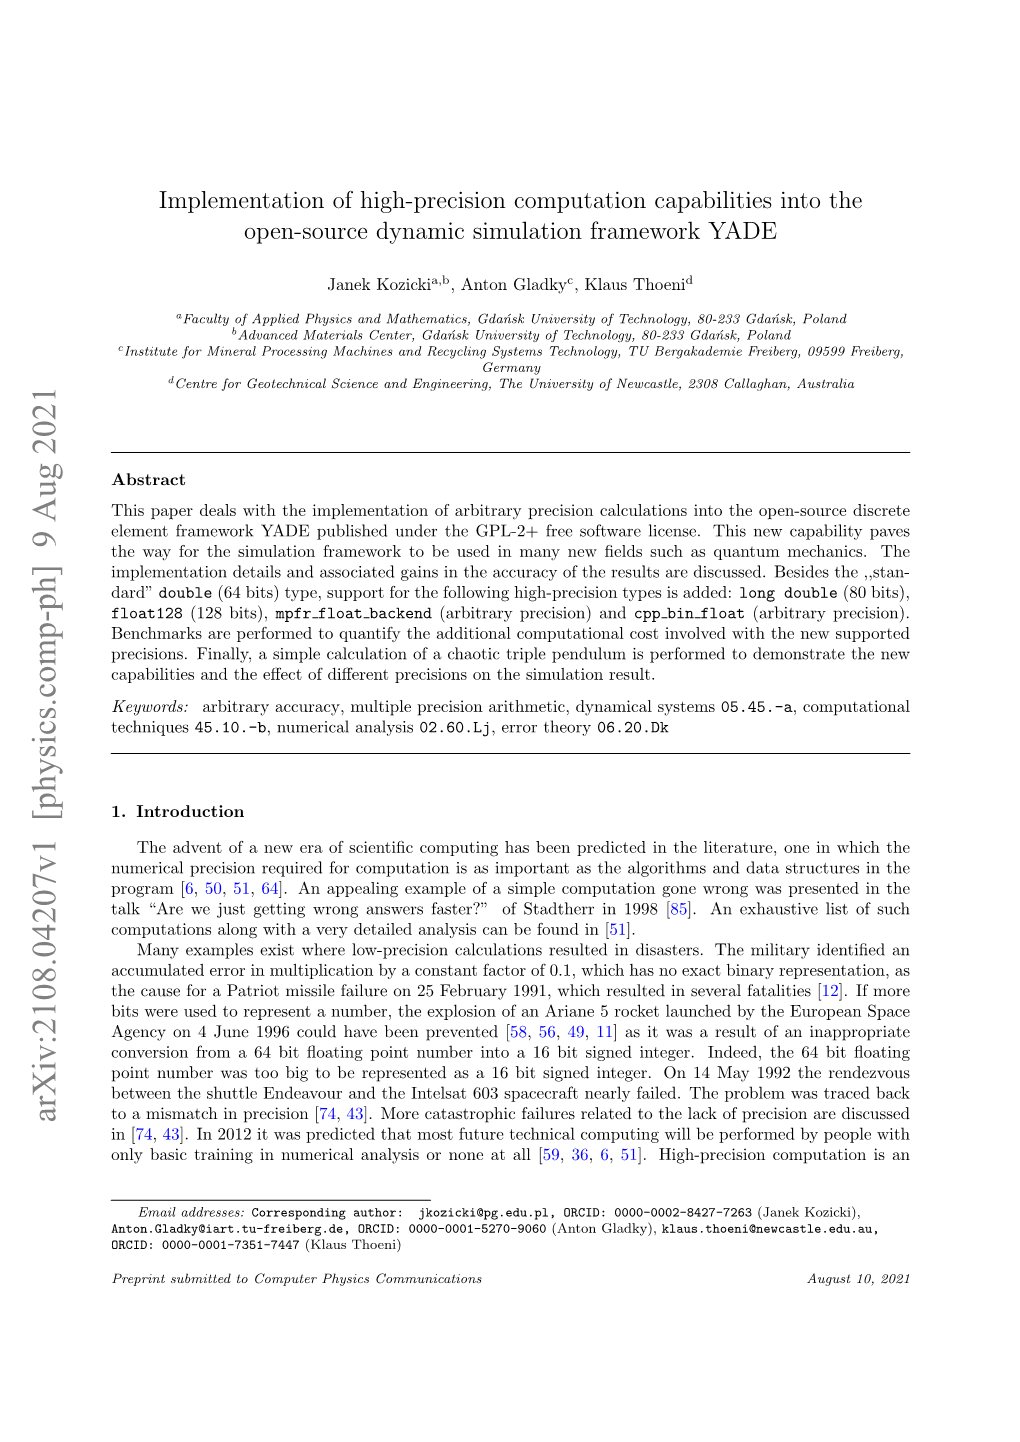 Implementation of High-Precision Computation Capabilities Into the Open-Source Dynamic Simulation Framework YADE